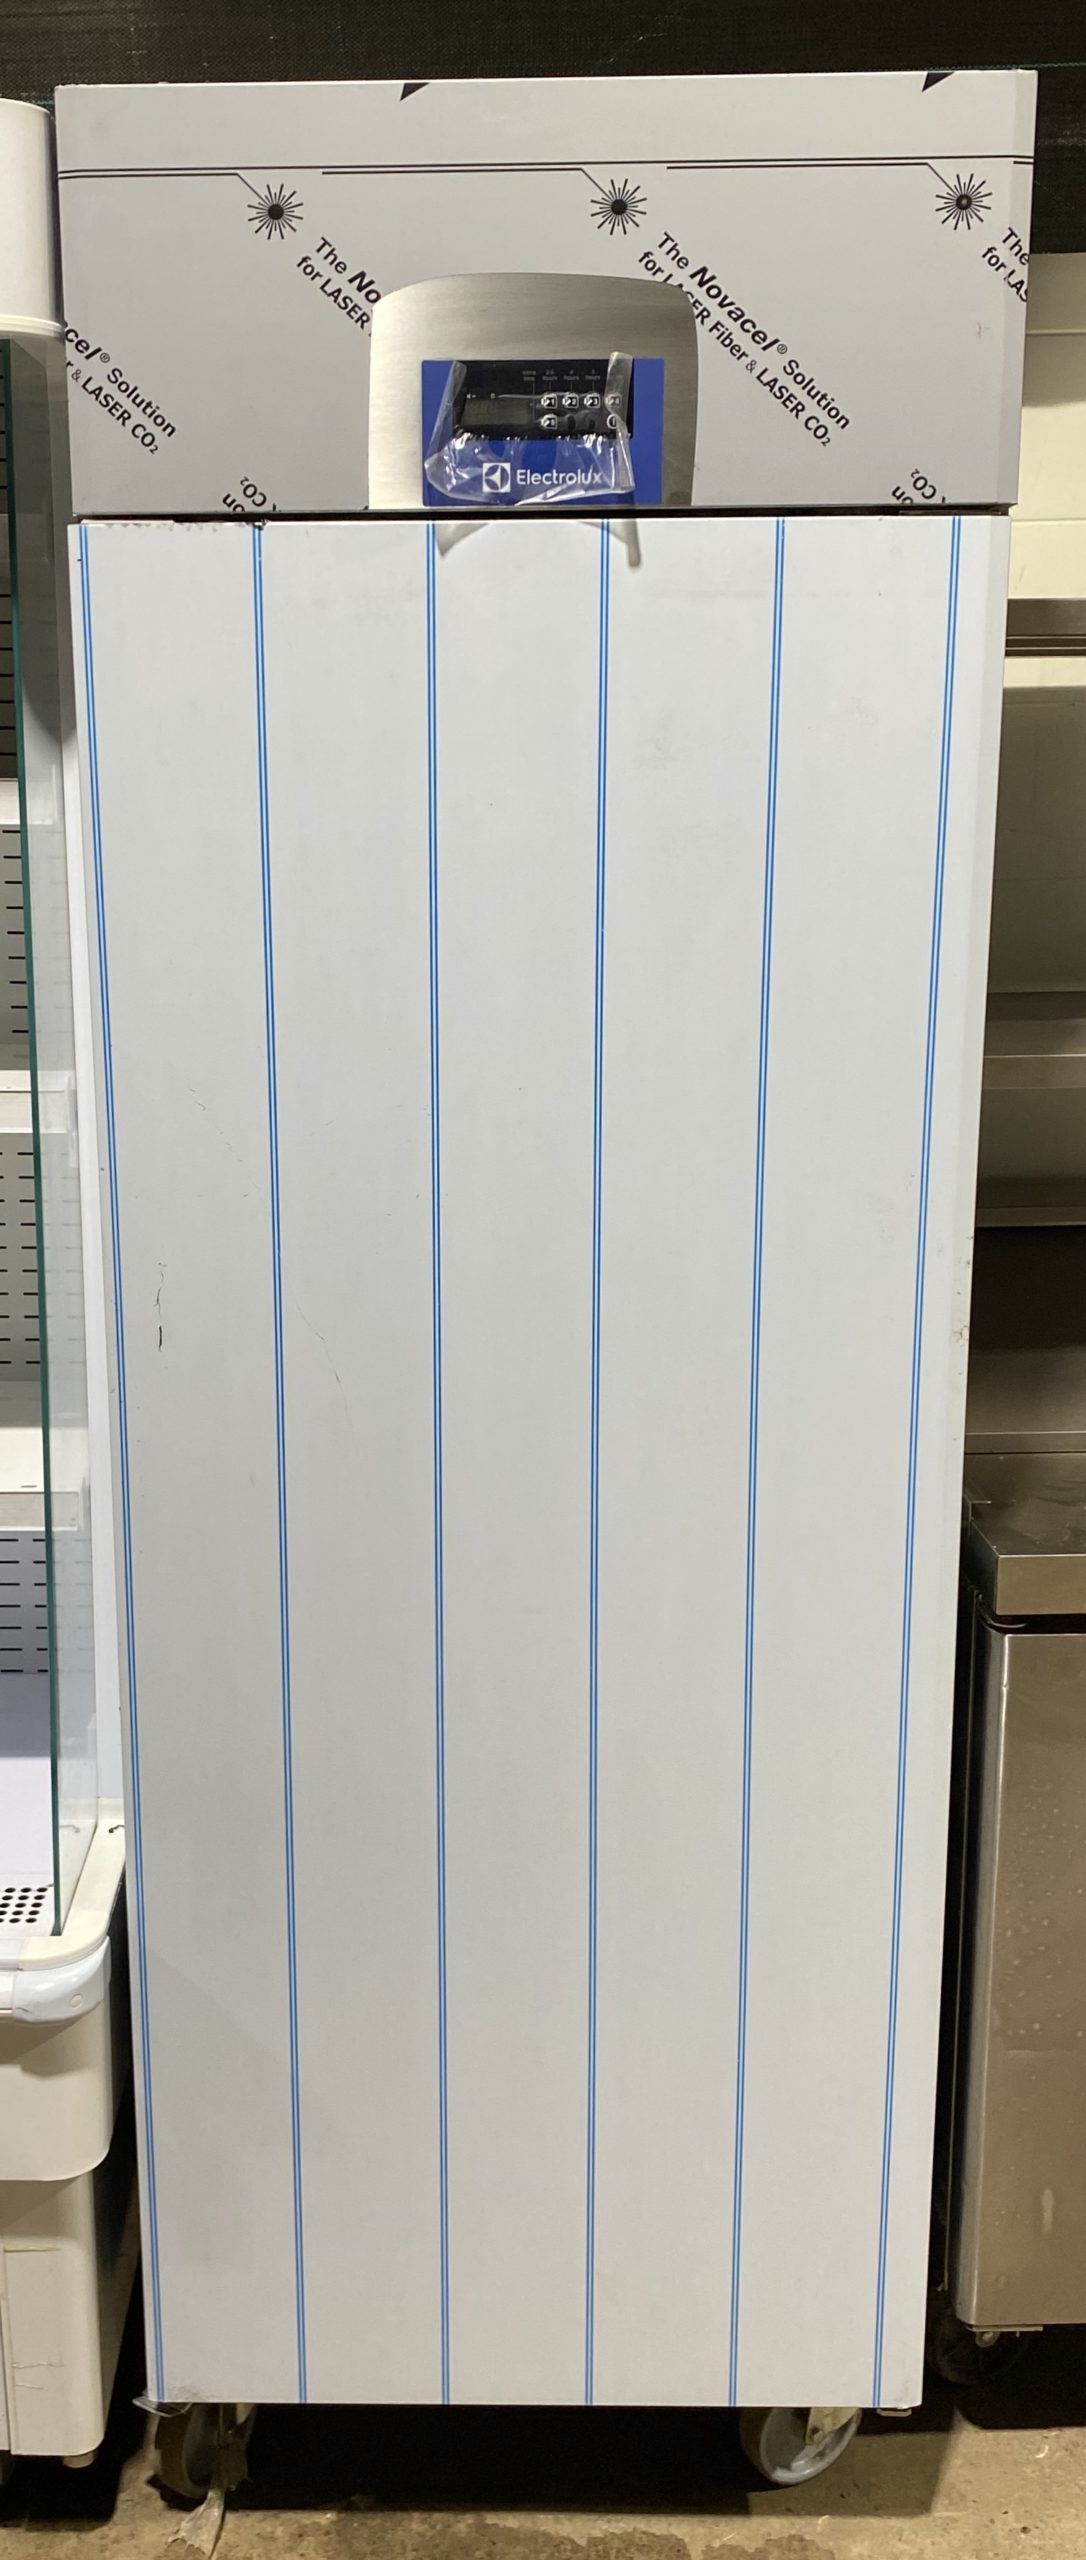 Electrolux Thawing Cabinet